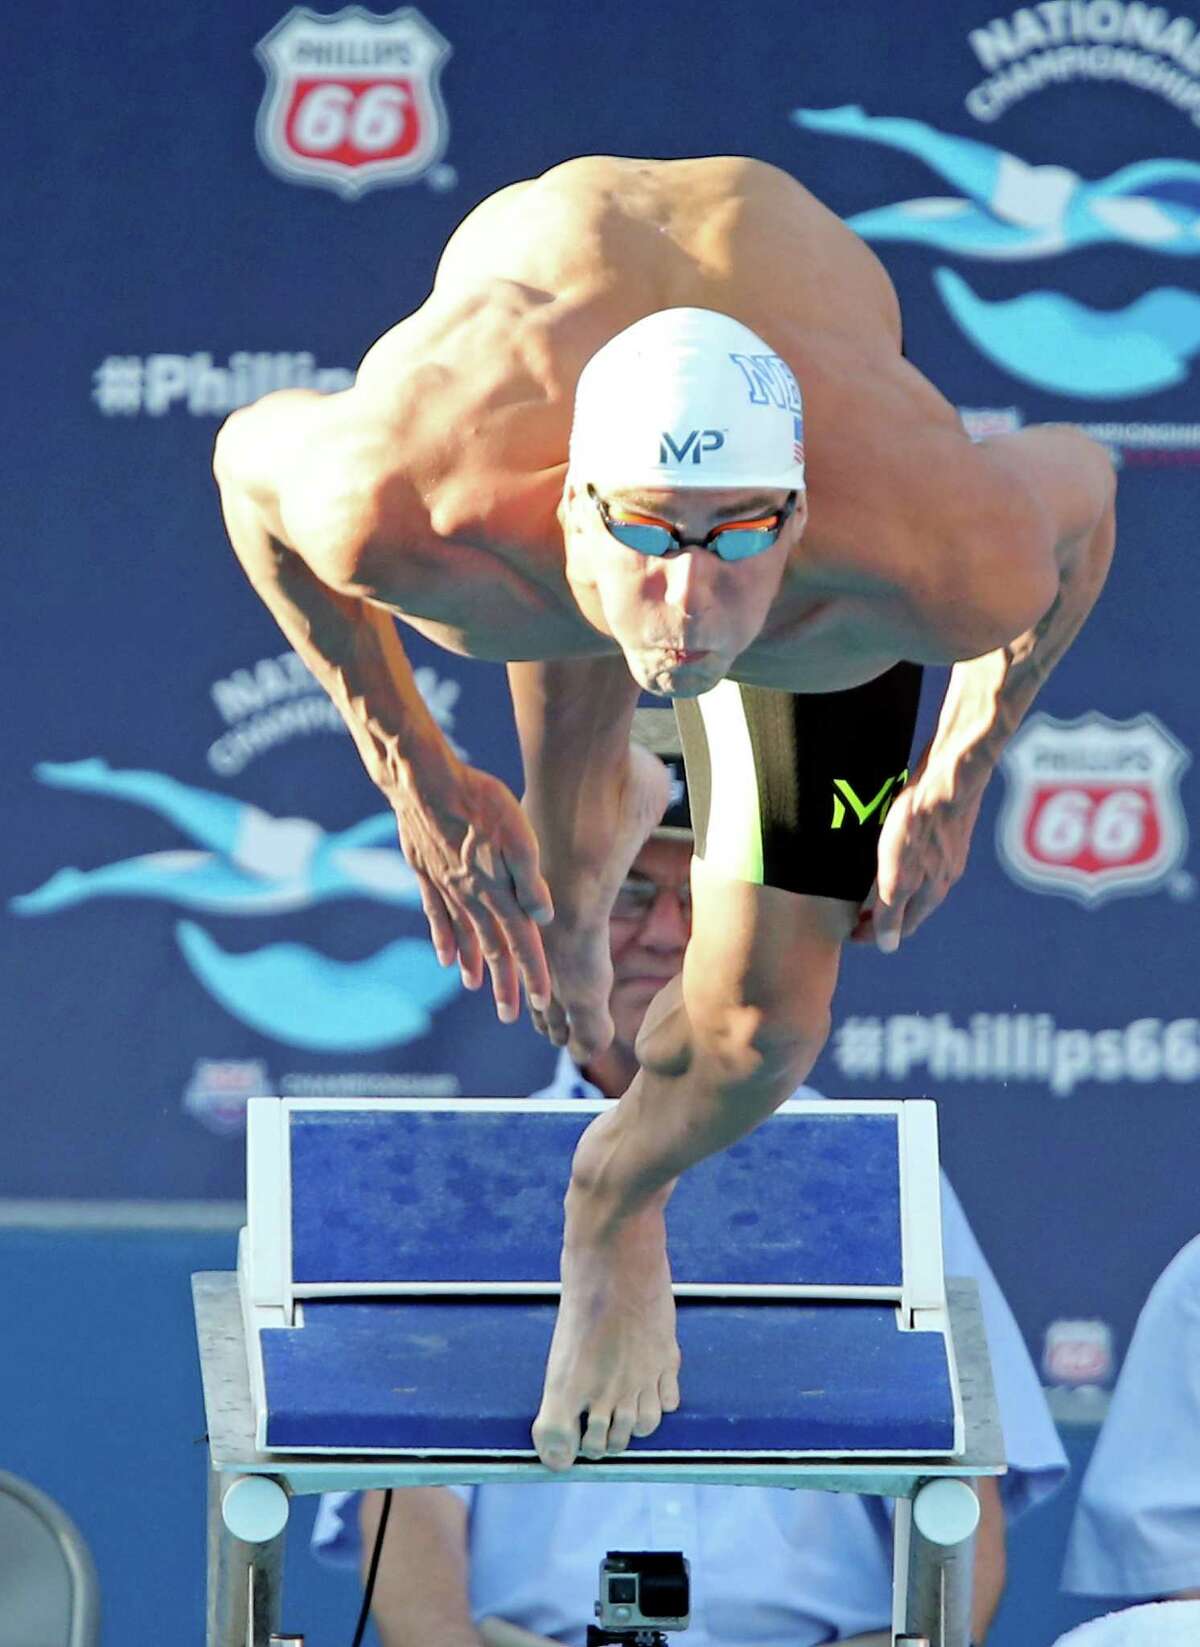 Michael Phelps starts the men's 200-meter butterfly during the 2015 Phillips 66 National Championships held Friday Aug. 7, 2015 at the Northside Swim Center. Phelps finished first with a time of 1:52.94.